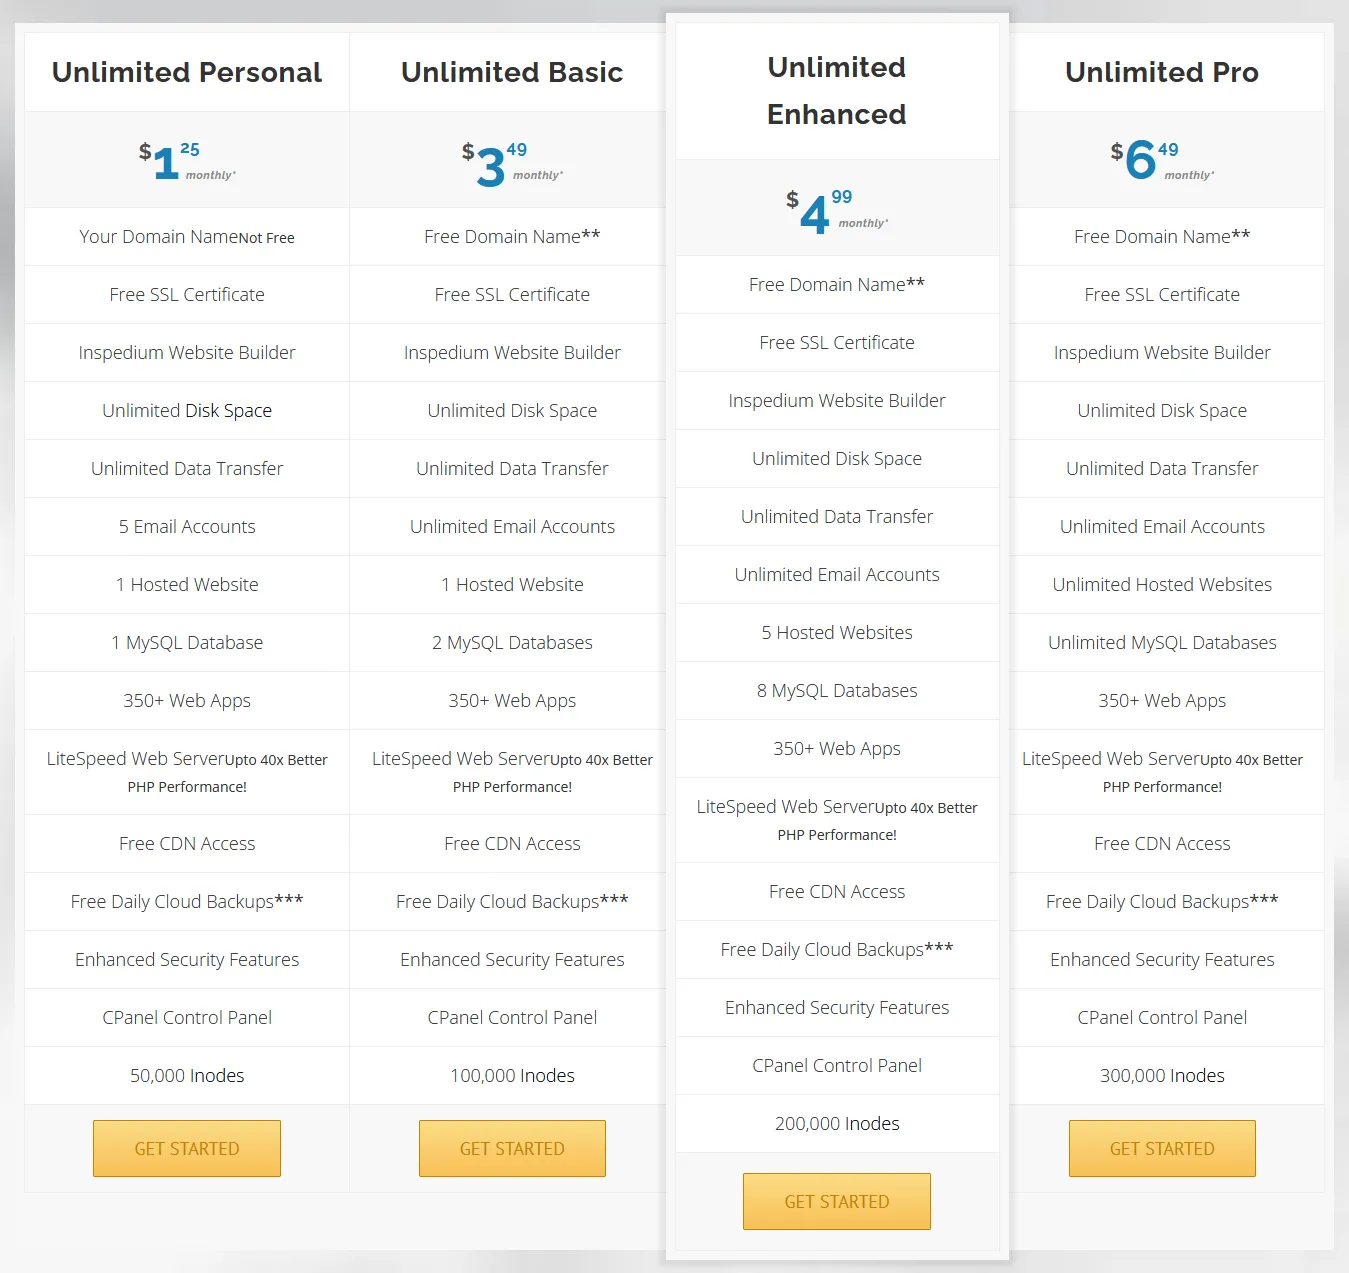 Inspedium offers 4 Unlimited Shared Hosting plans i.e. Unlimited Personal, Unlimited Basic, Unlimited Enhanced, and Unlimited Pro. 